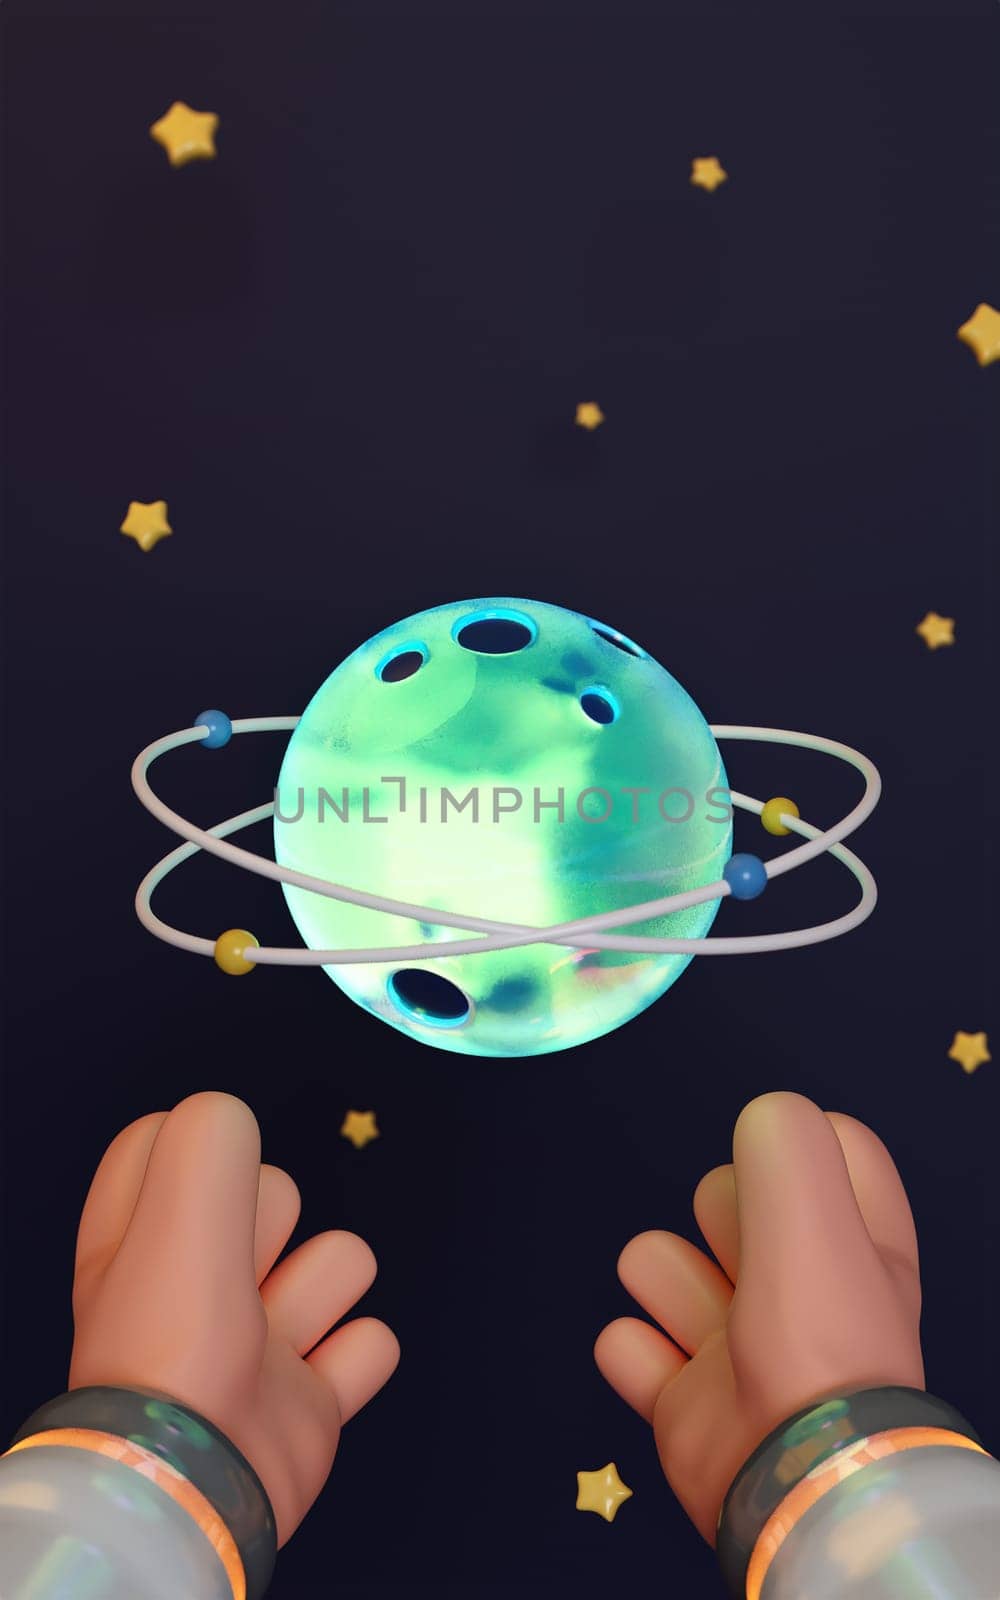 3d hands hold planet .Cosmonaut in space, exploration of outer space. stars and galaxies in background. banner, 3d render illustration. by meepiangraphic